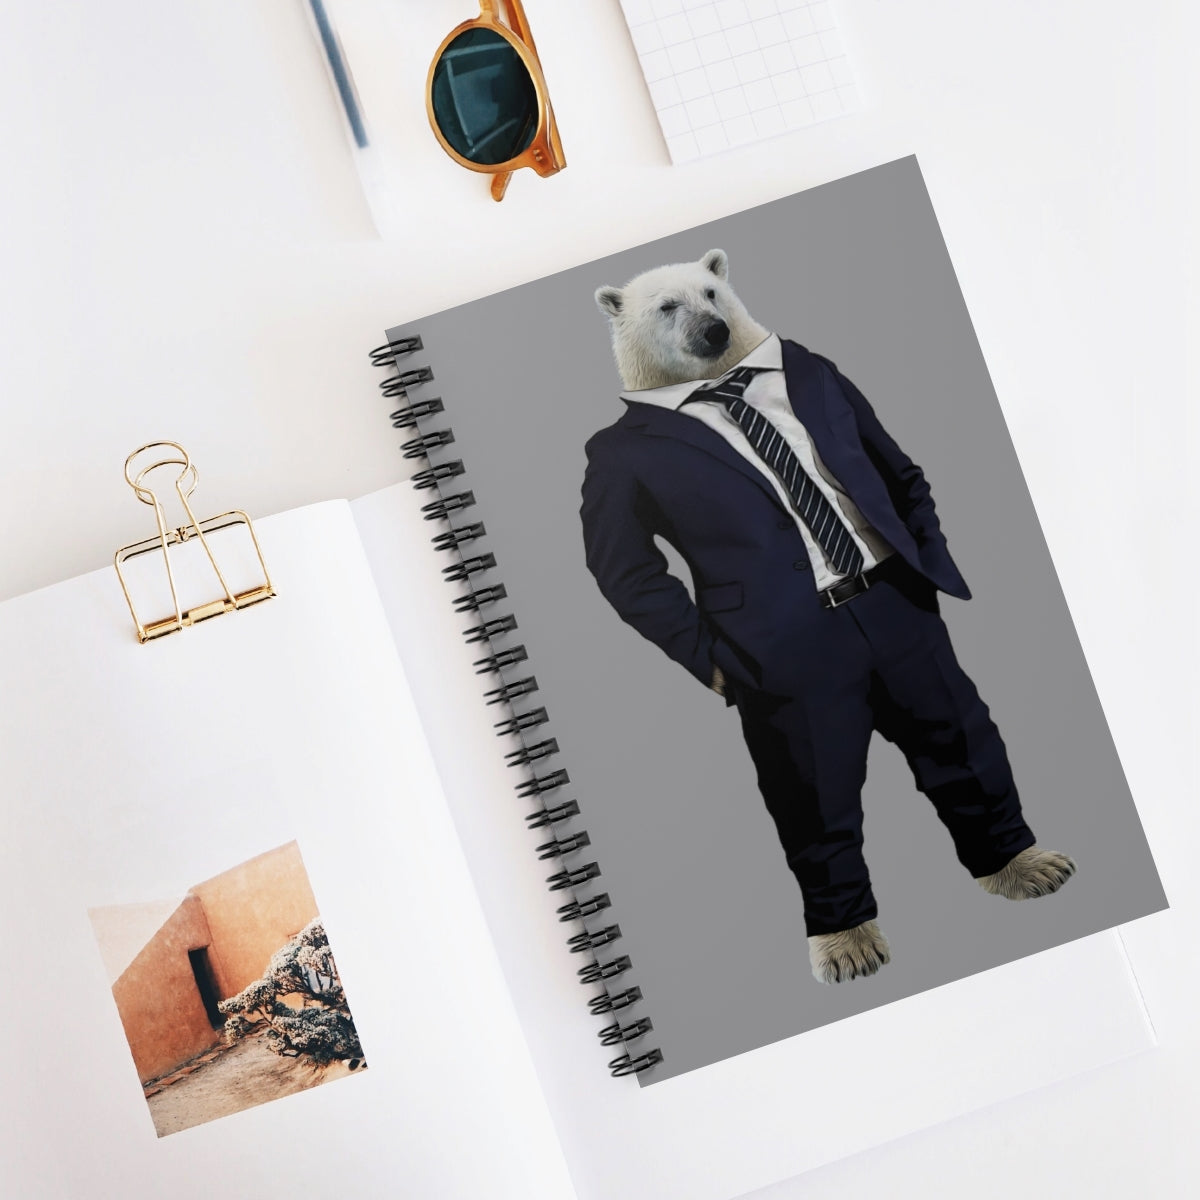 Don't Ask Me Why! Polar bear in a suit -Spiral Notebook - Ruled LineBrainStorm Tees